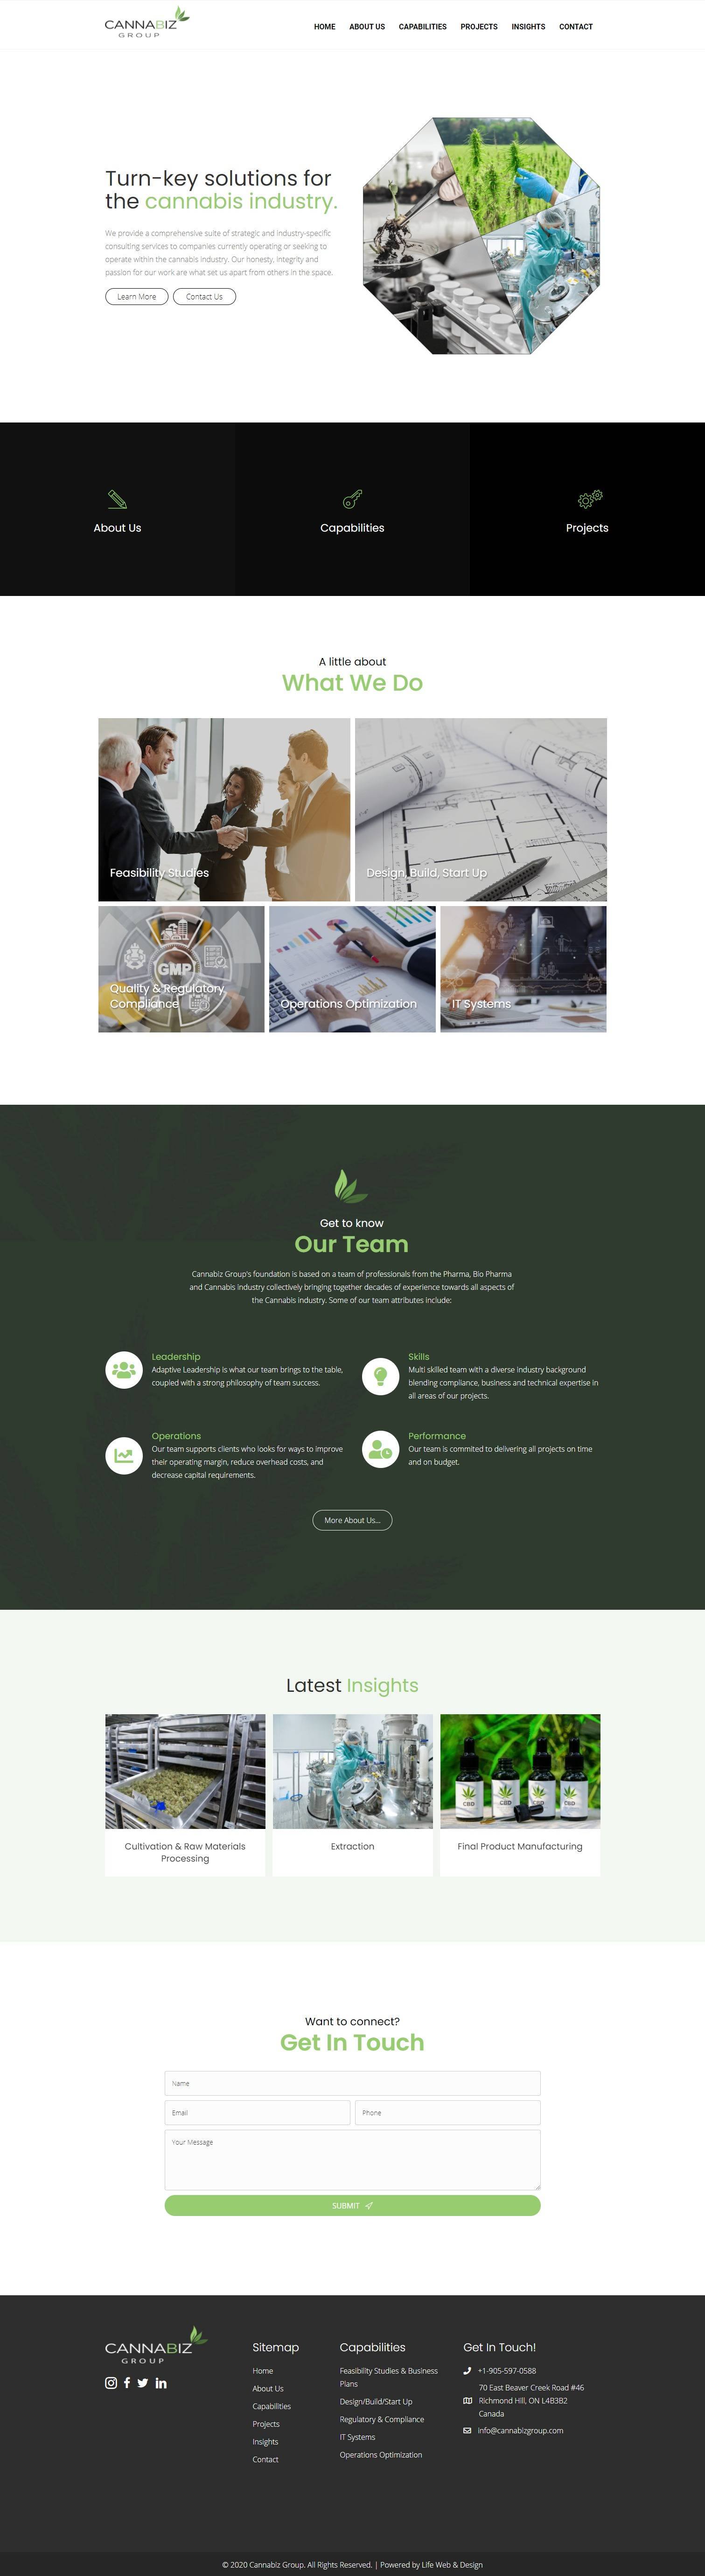 web design project for richmond hill client in the cannabis industry